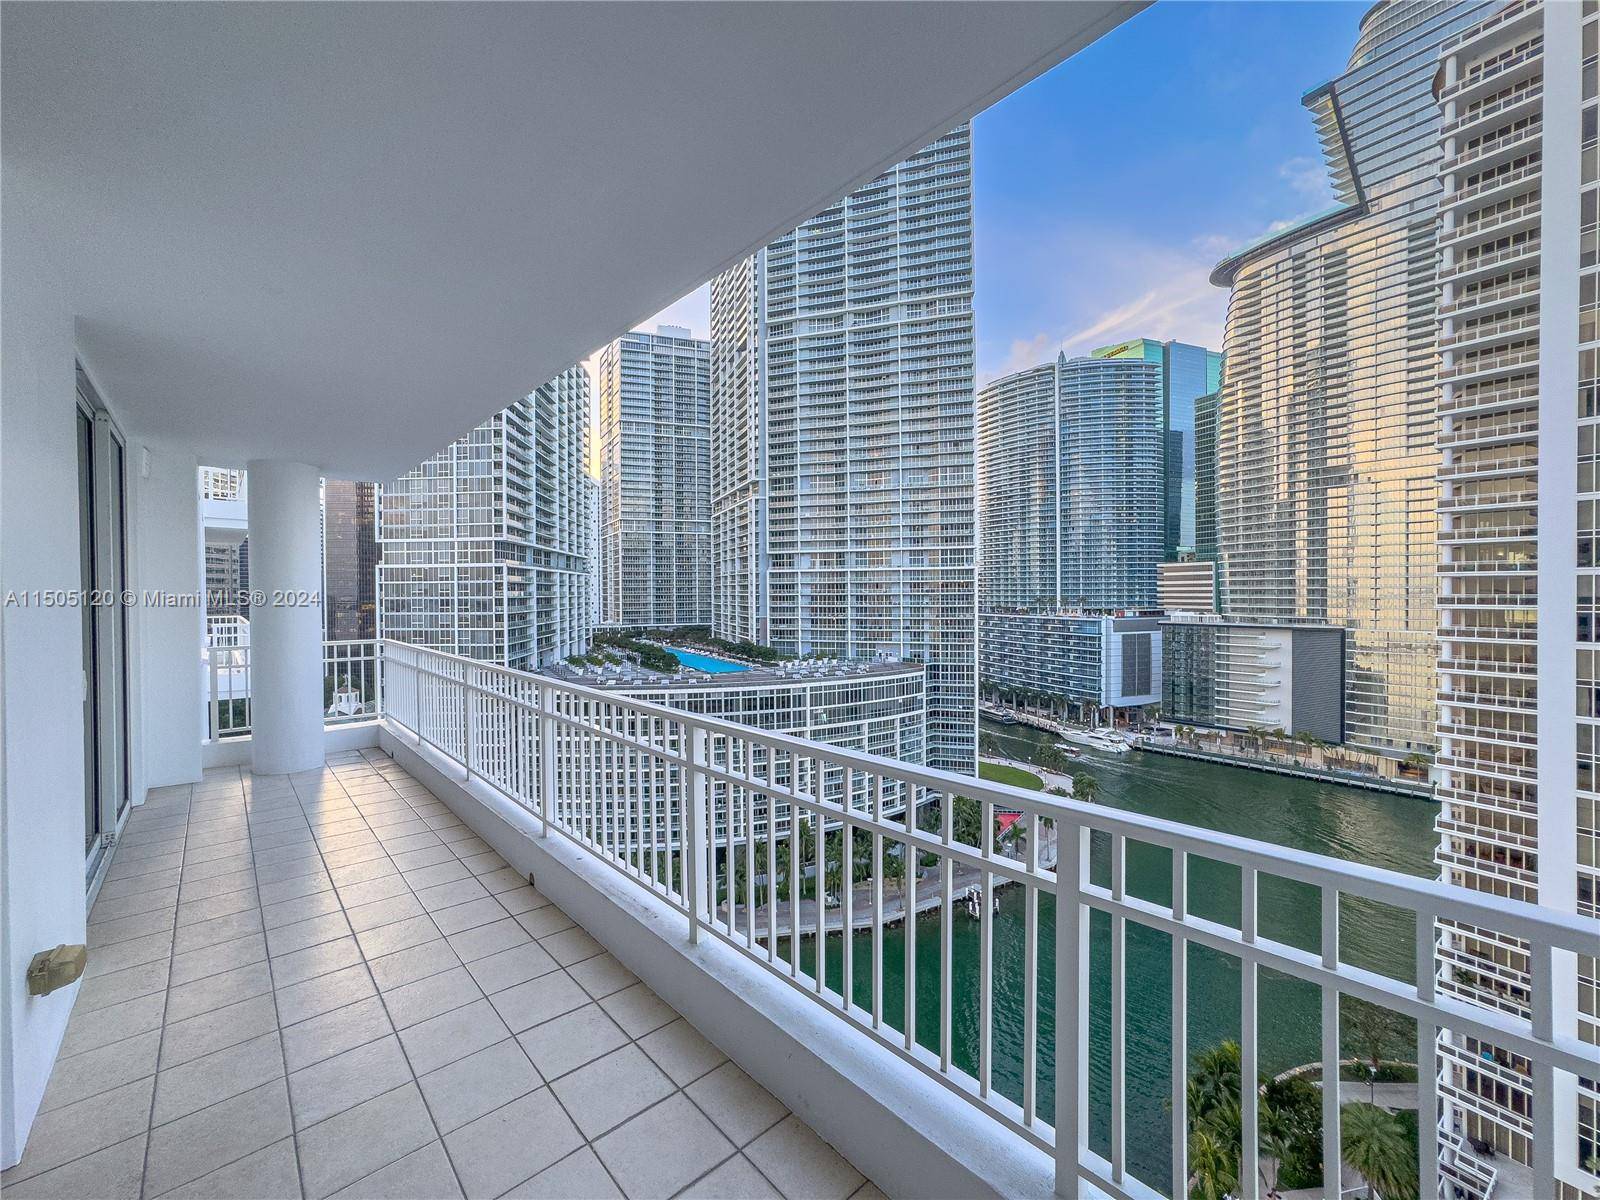 Discover luxury living at Courts Brickell Key, Miami.